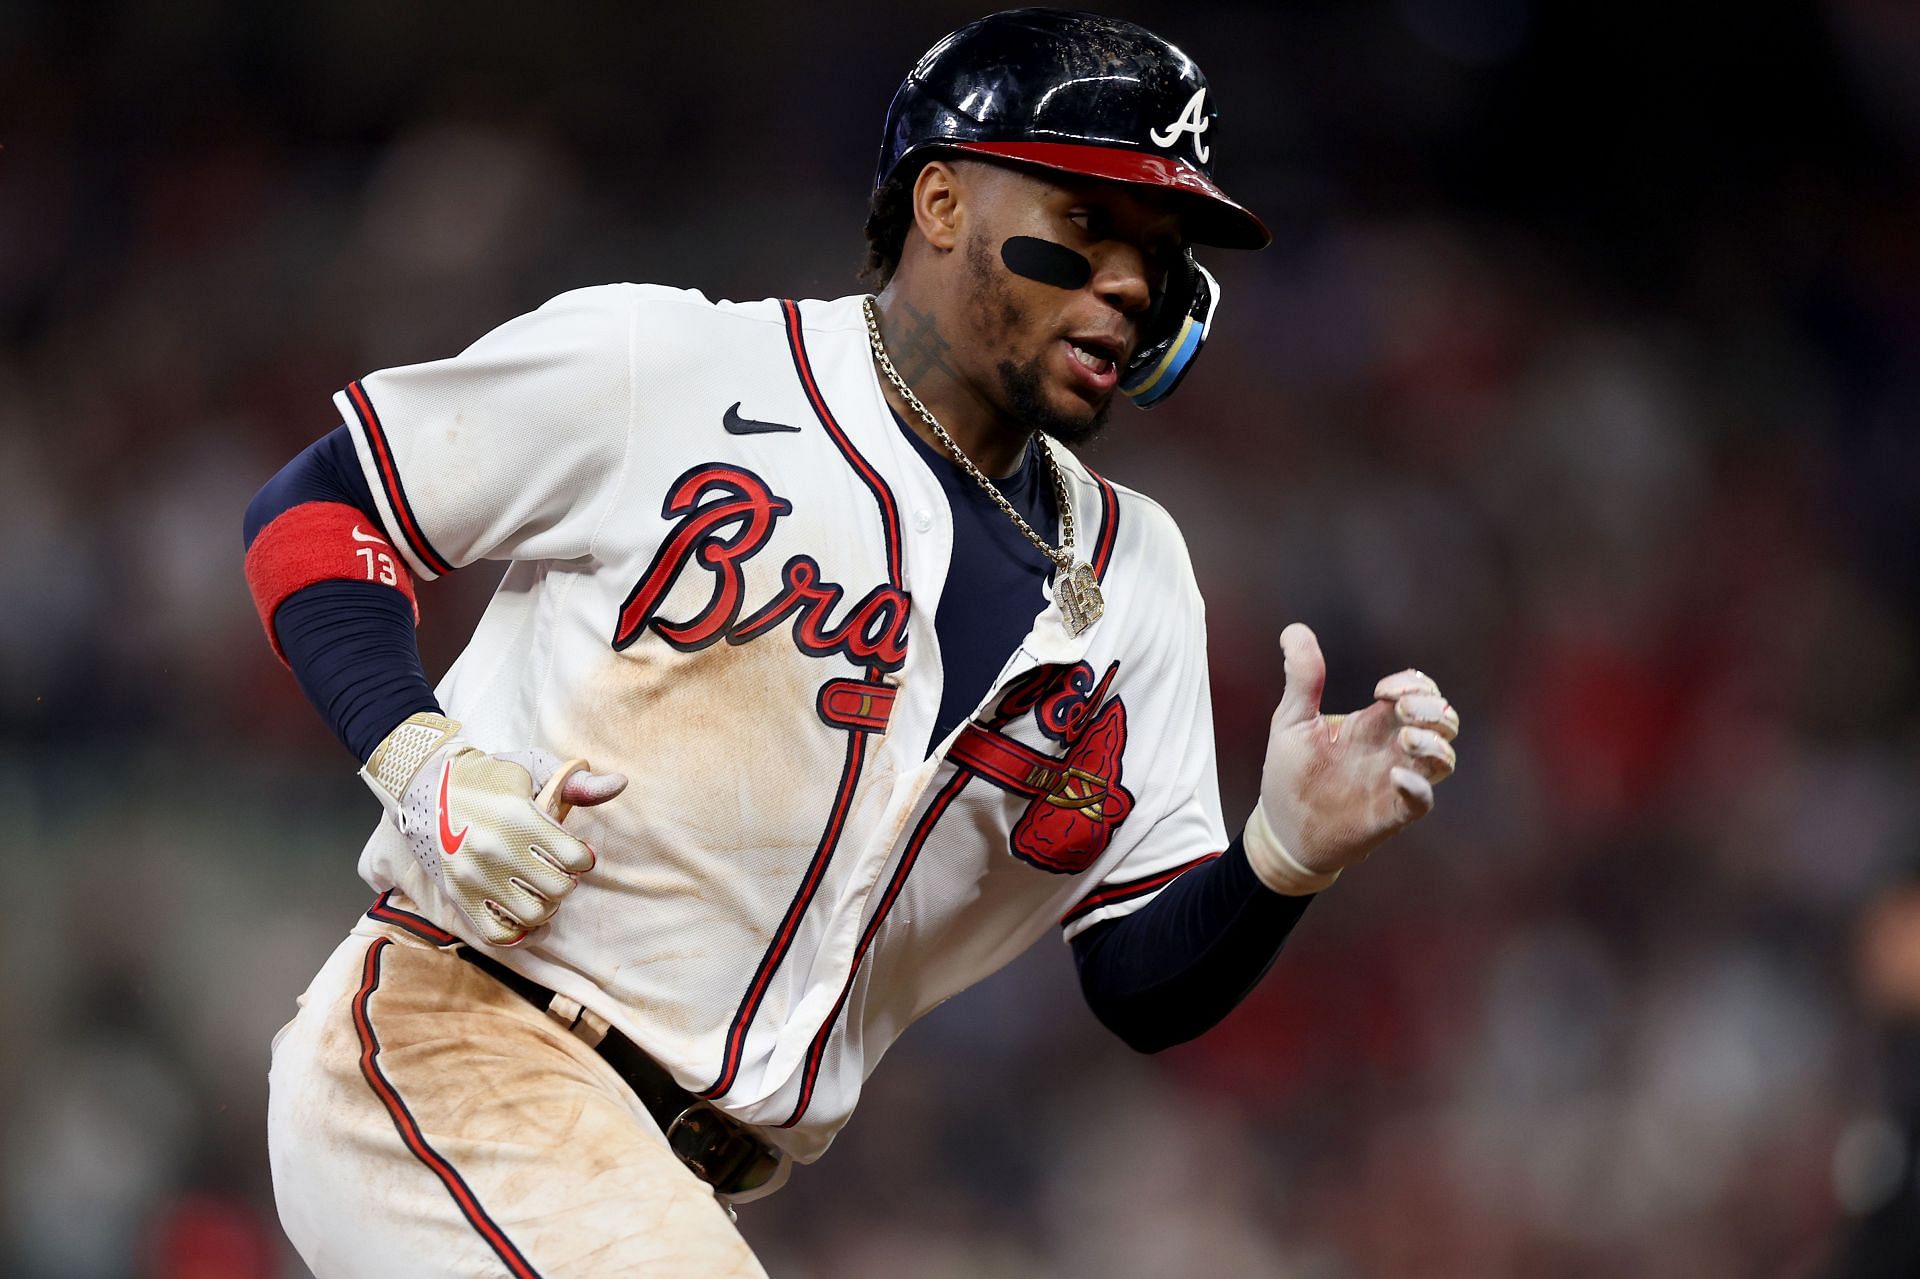 VIDEO: Adorable Kid Mashing HR in Ronald Acuna Jr Jersey and Going